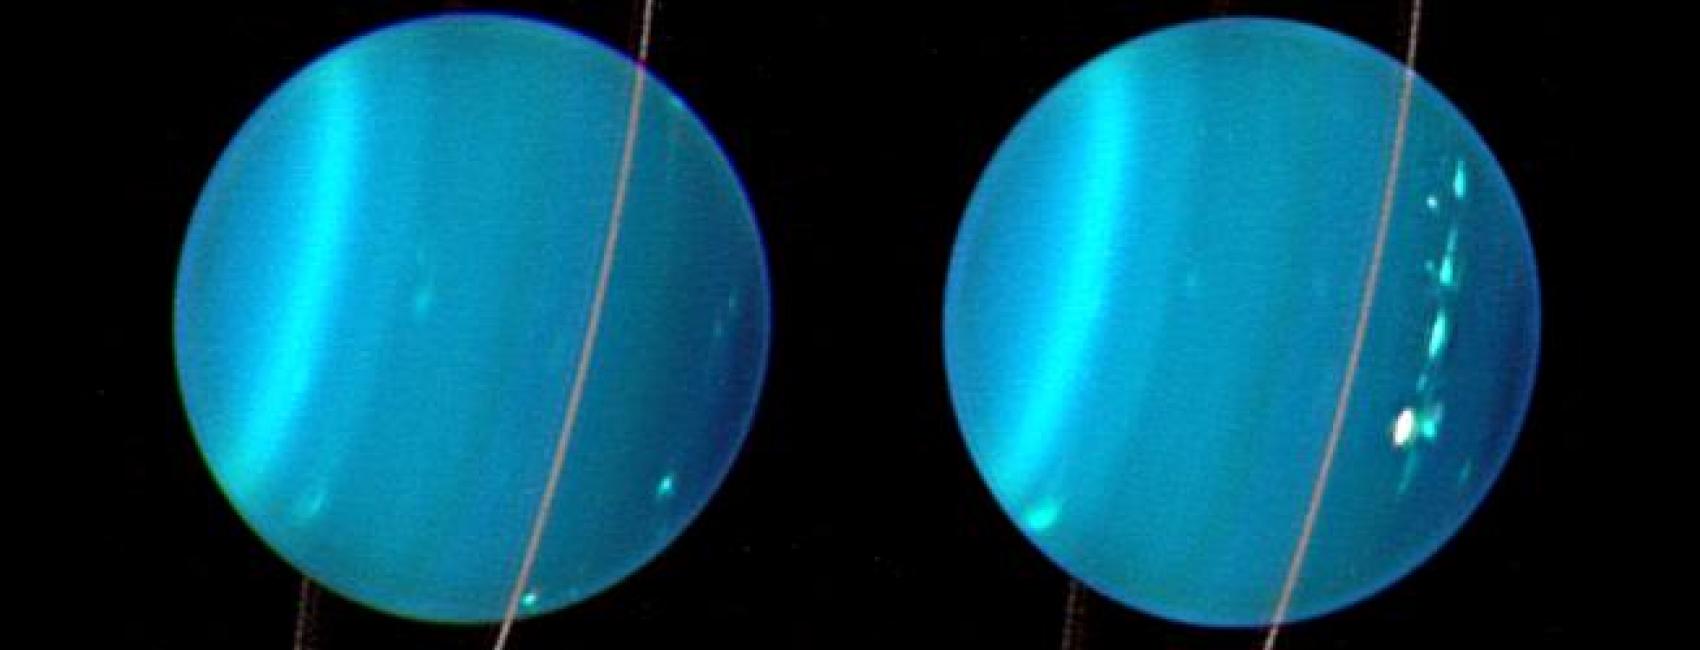 Uranus and its rings, illustration - Stock Image - C040/3955 - Science  Photo Library